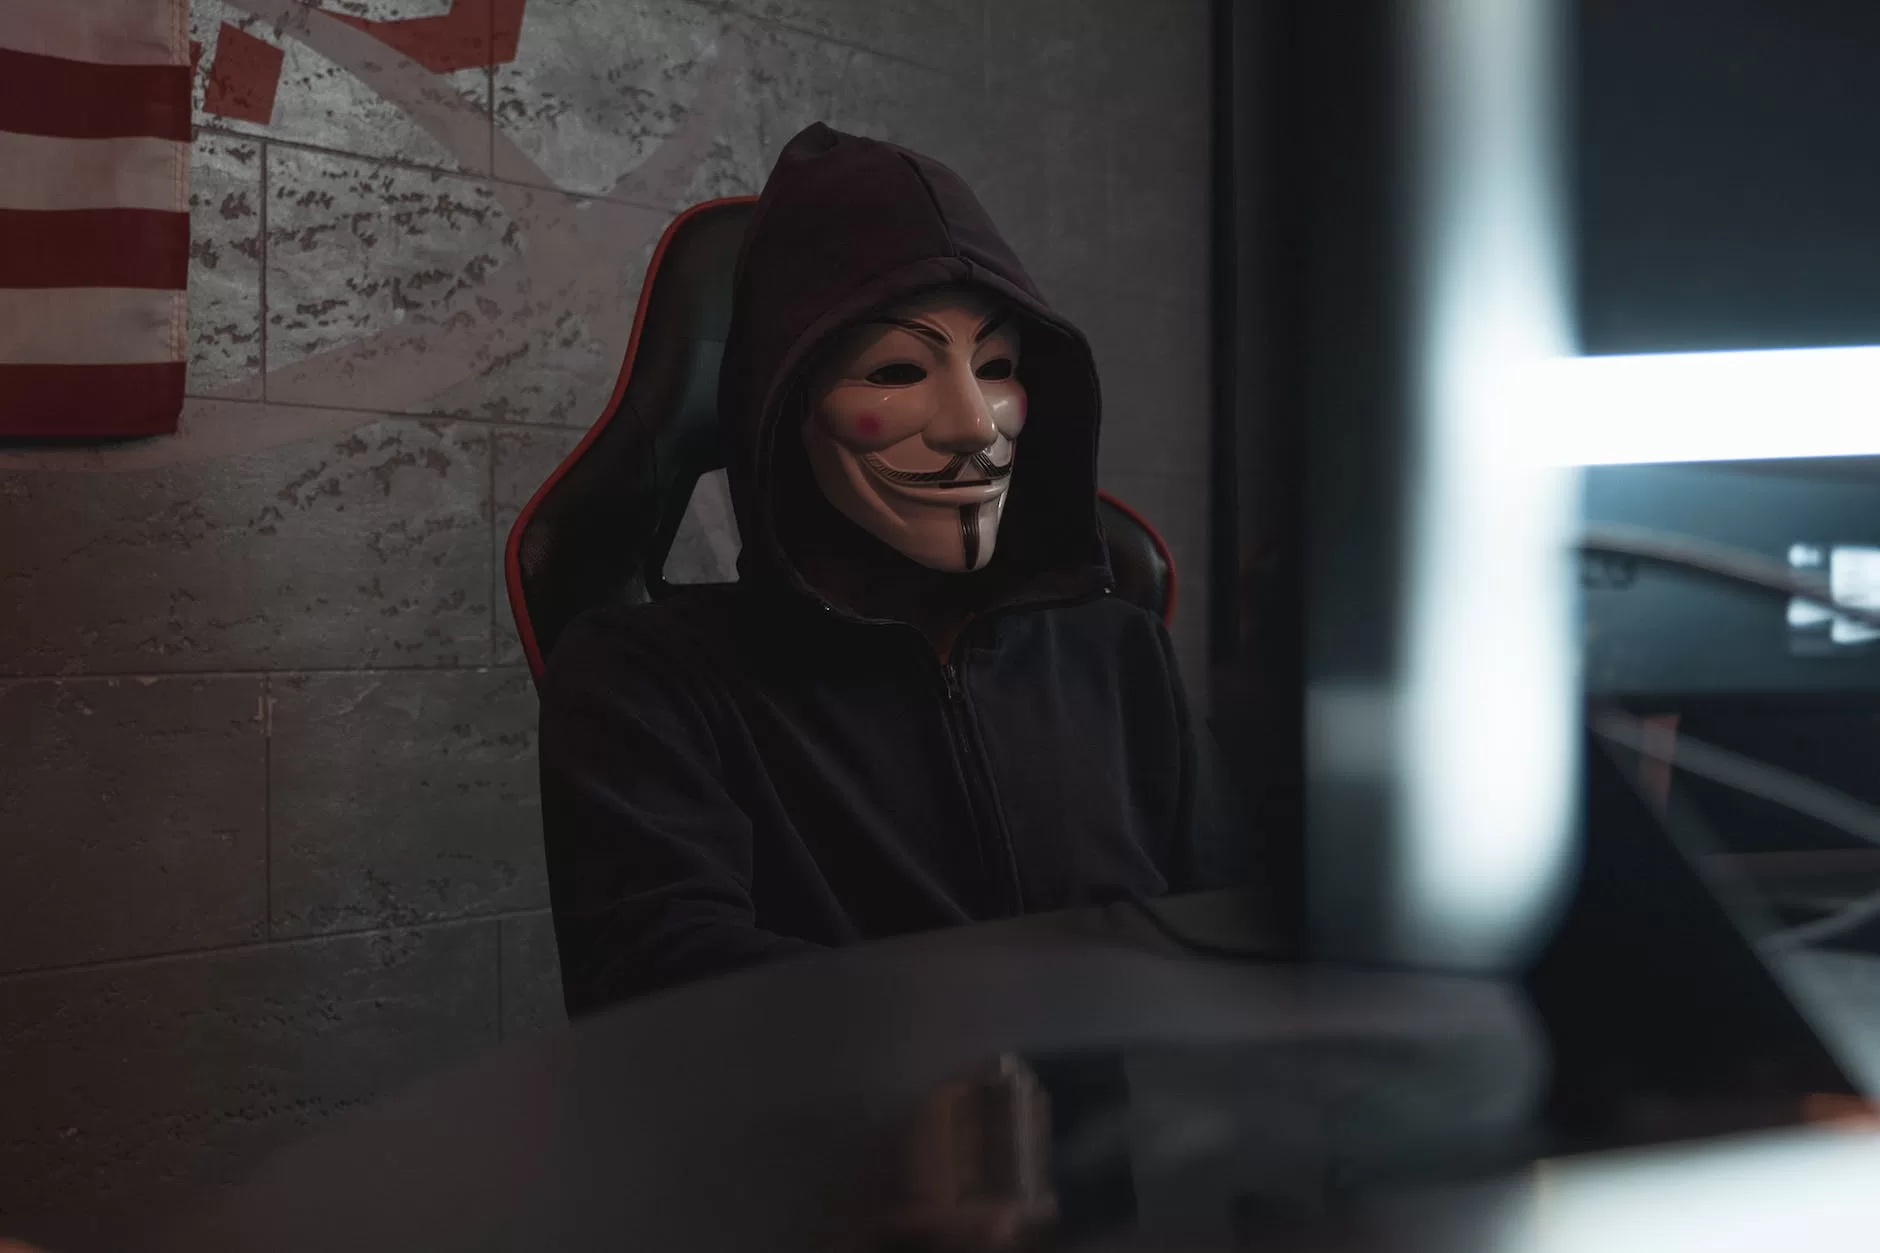 person in black hoodie hacking a computer system